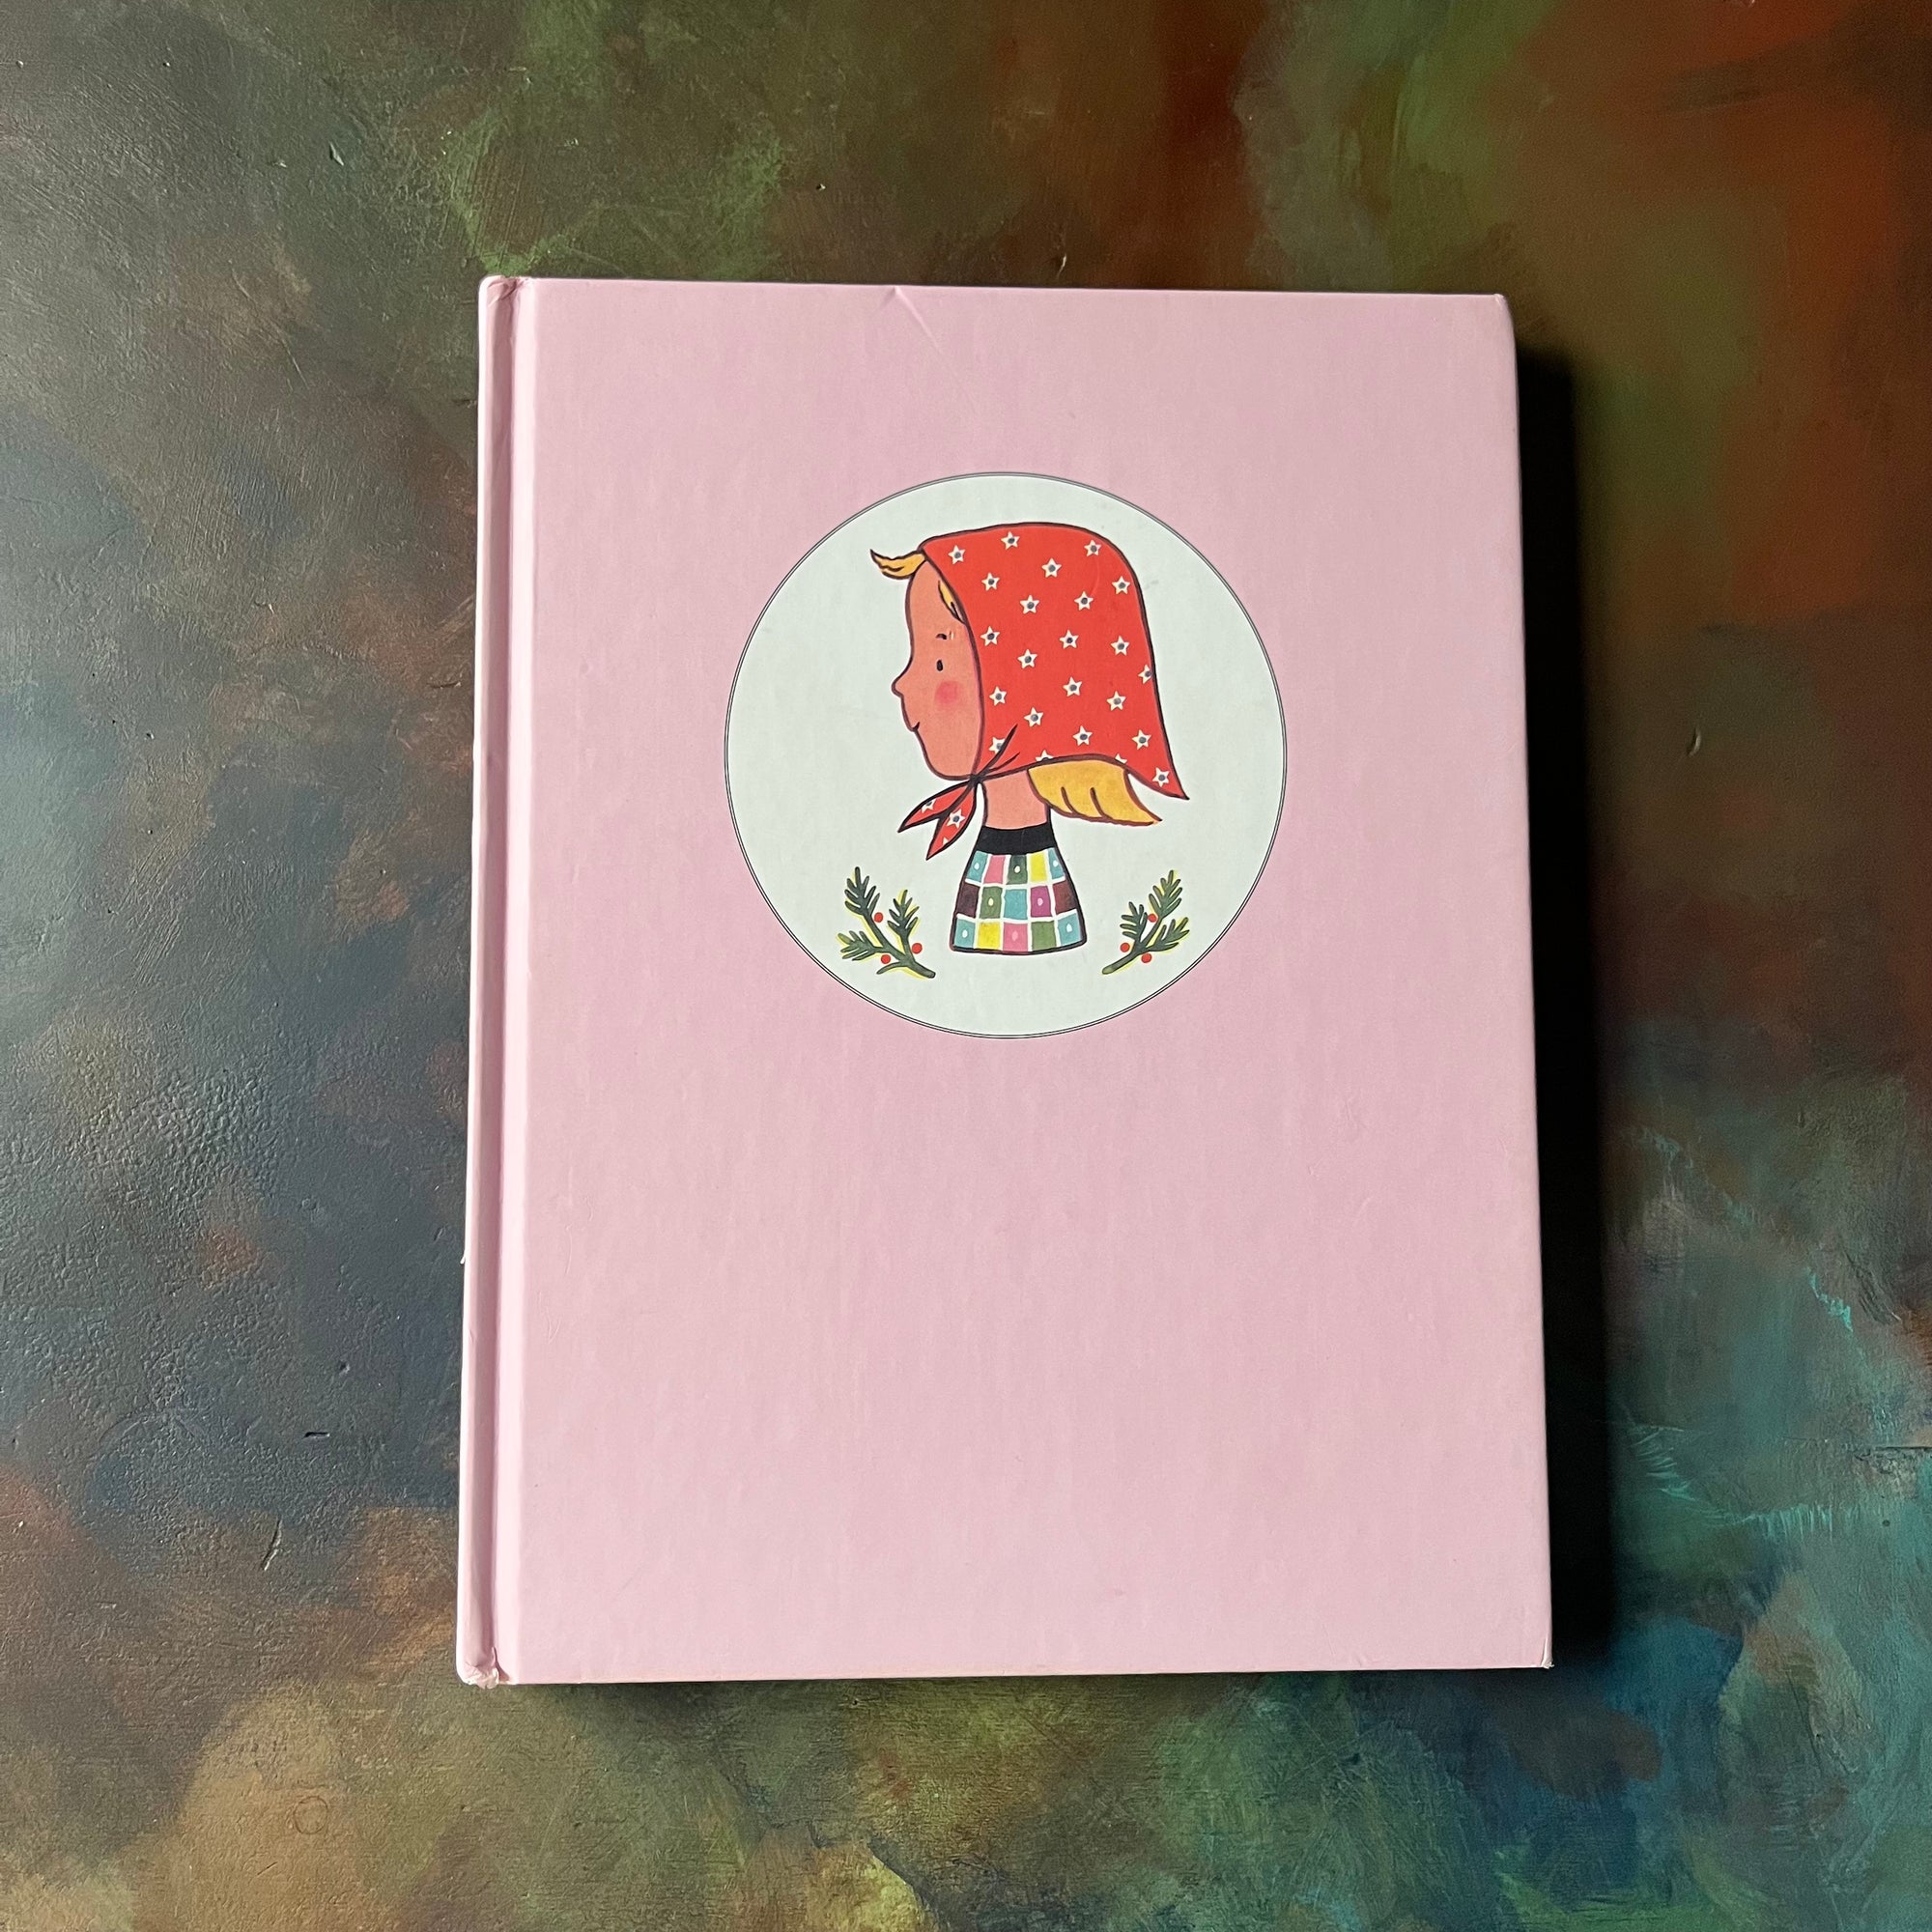 The Adventures of Jeanne-Marie by Francoise Seignobosc-1999 Edition-children's picture book-view of the front cover in pink with an illustration of Jeann-Marie in a circle wearing a handkerchief on her head